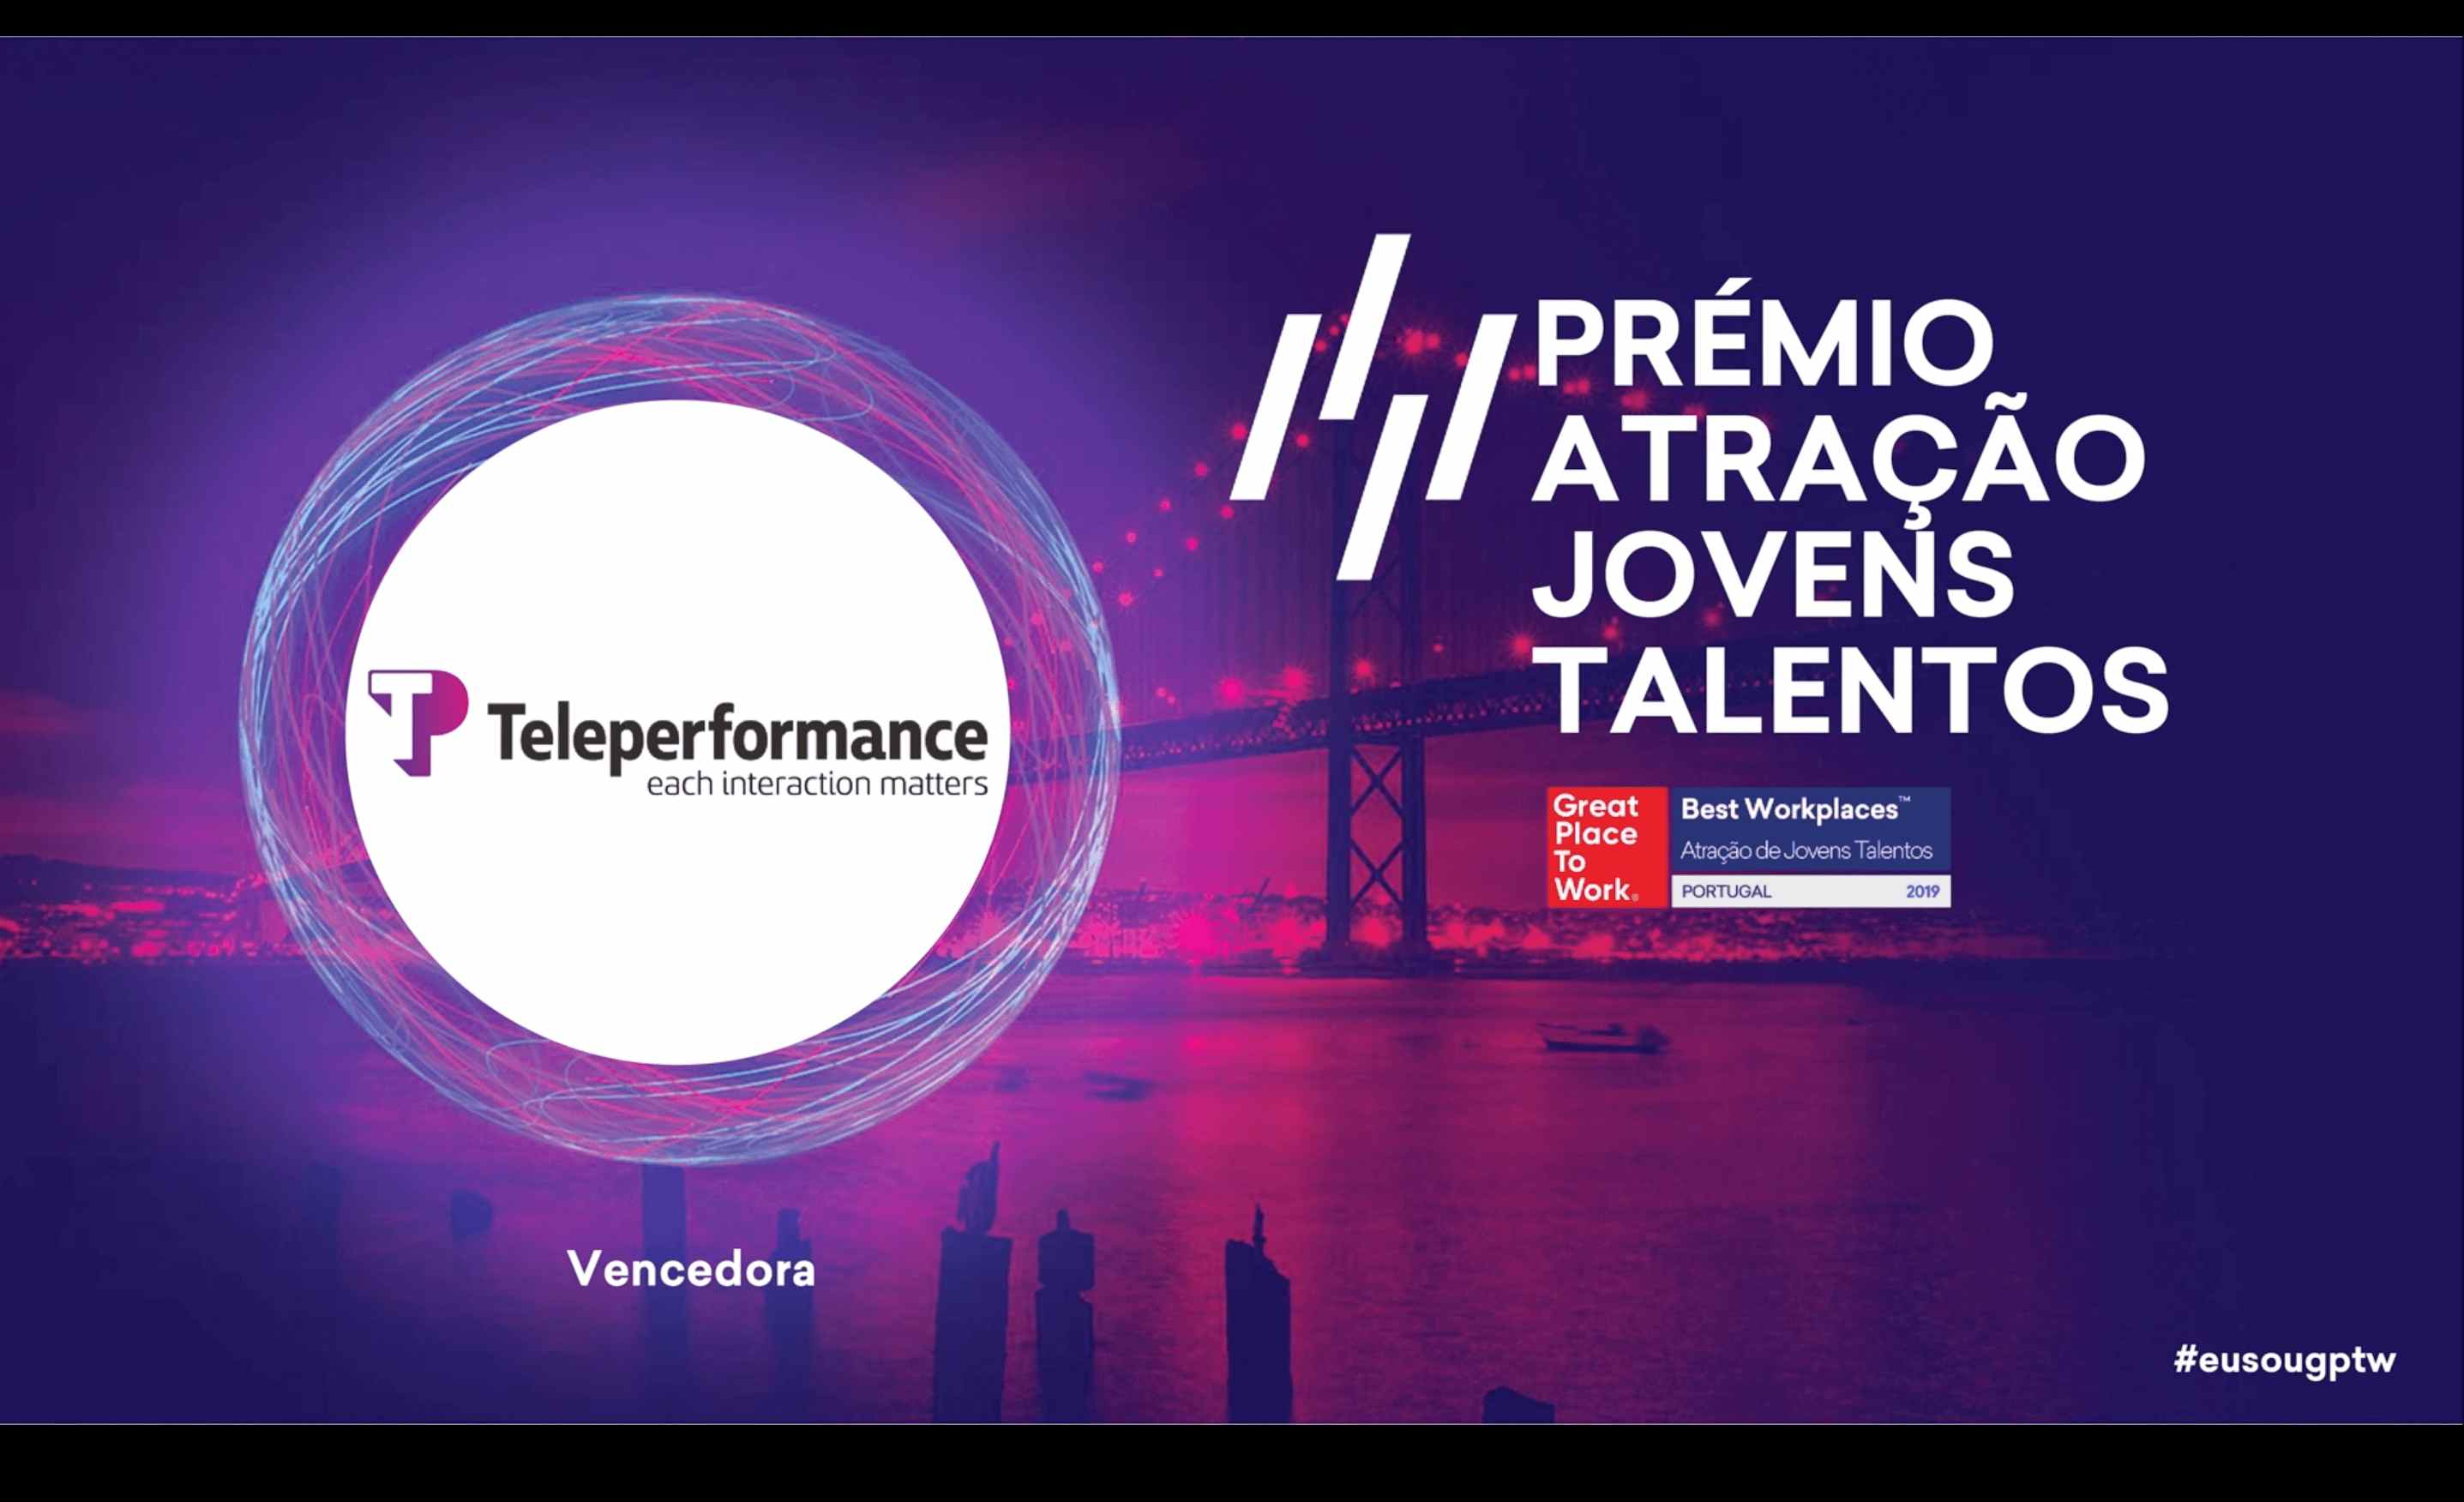 What is Teleperformance all about